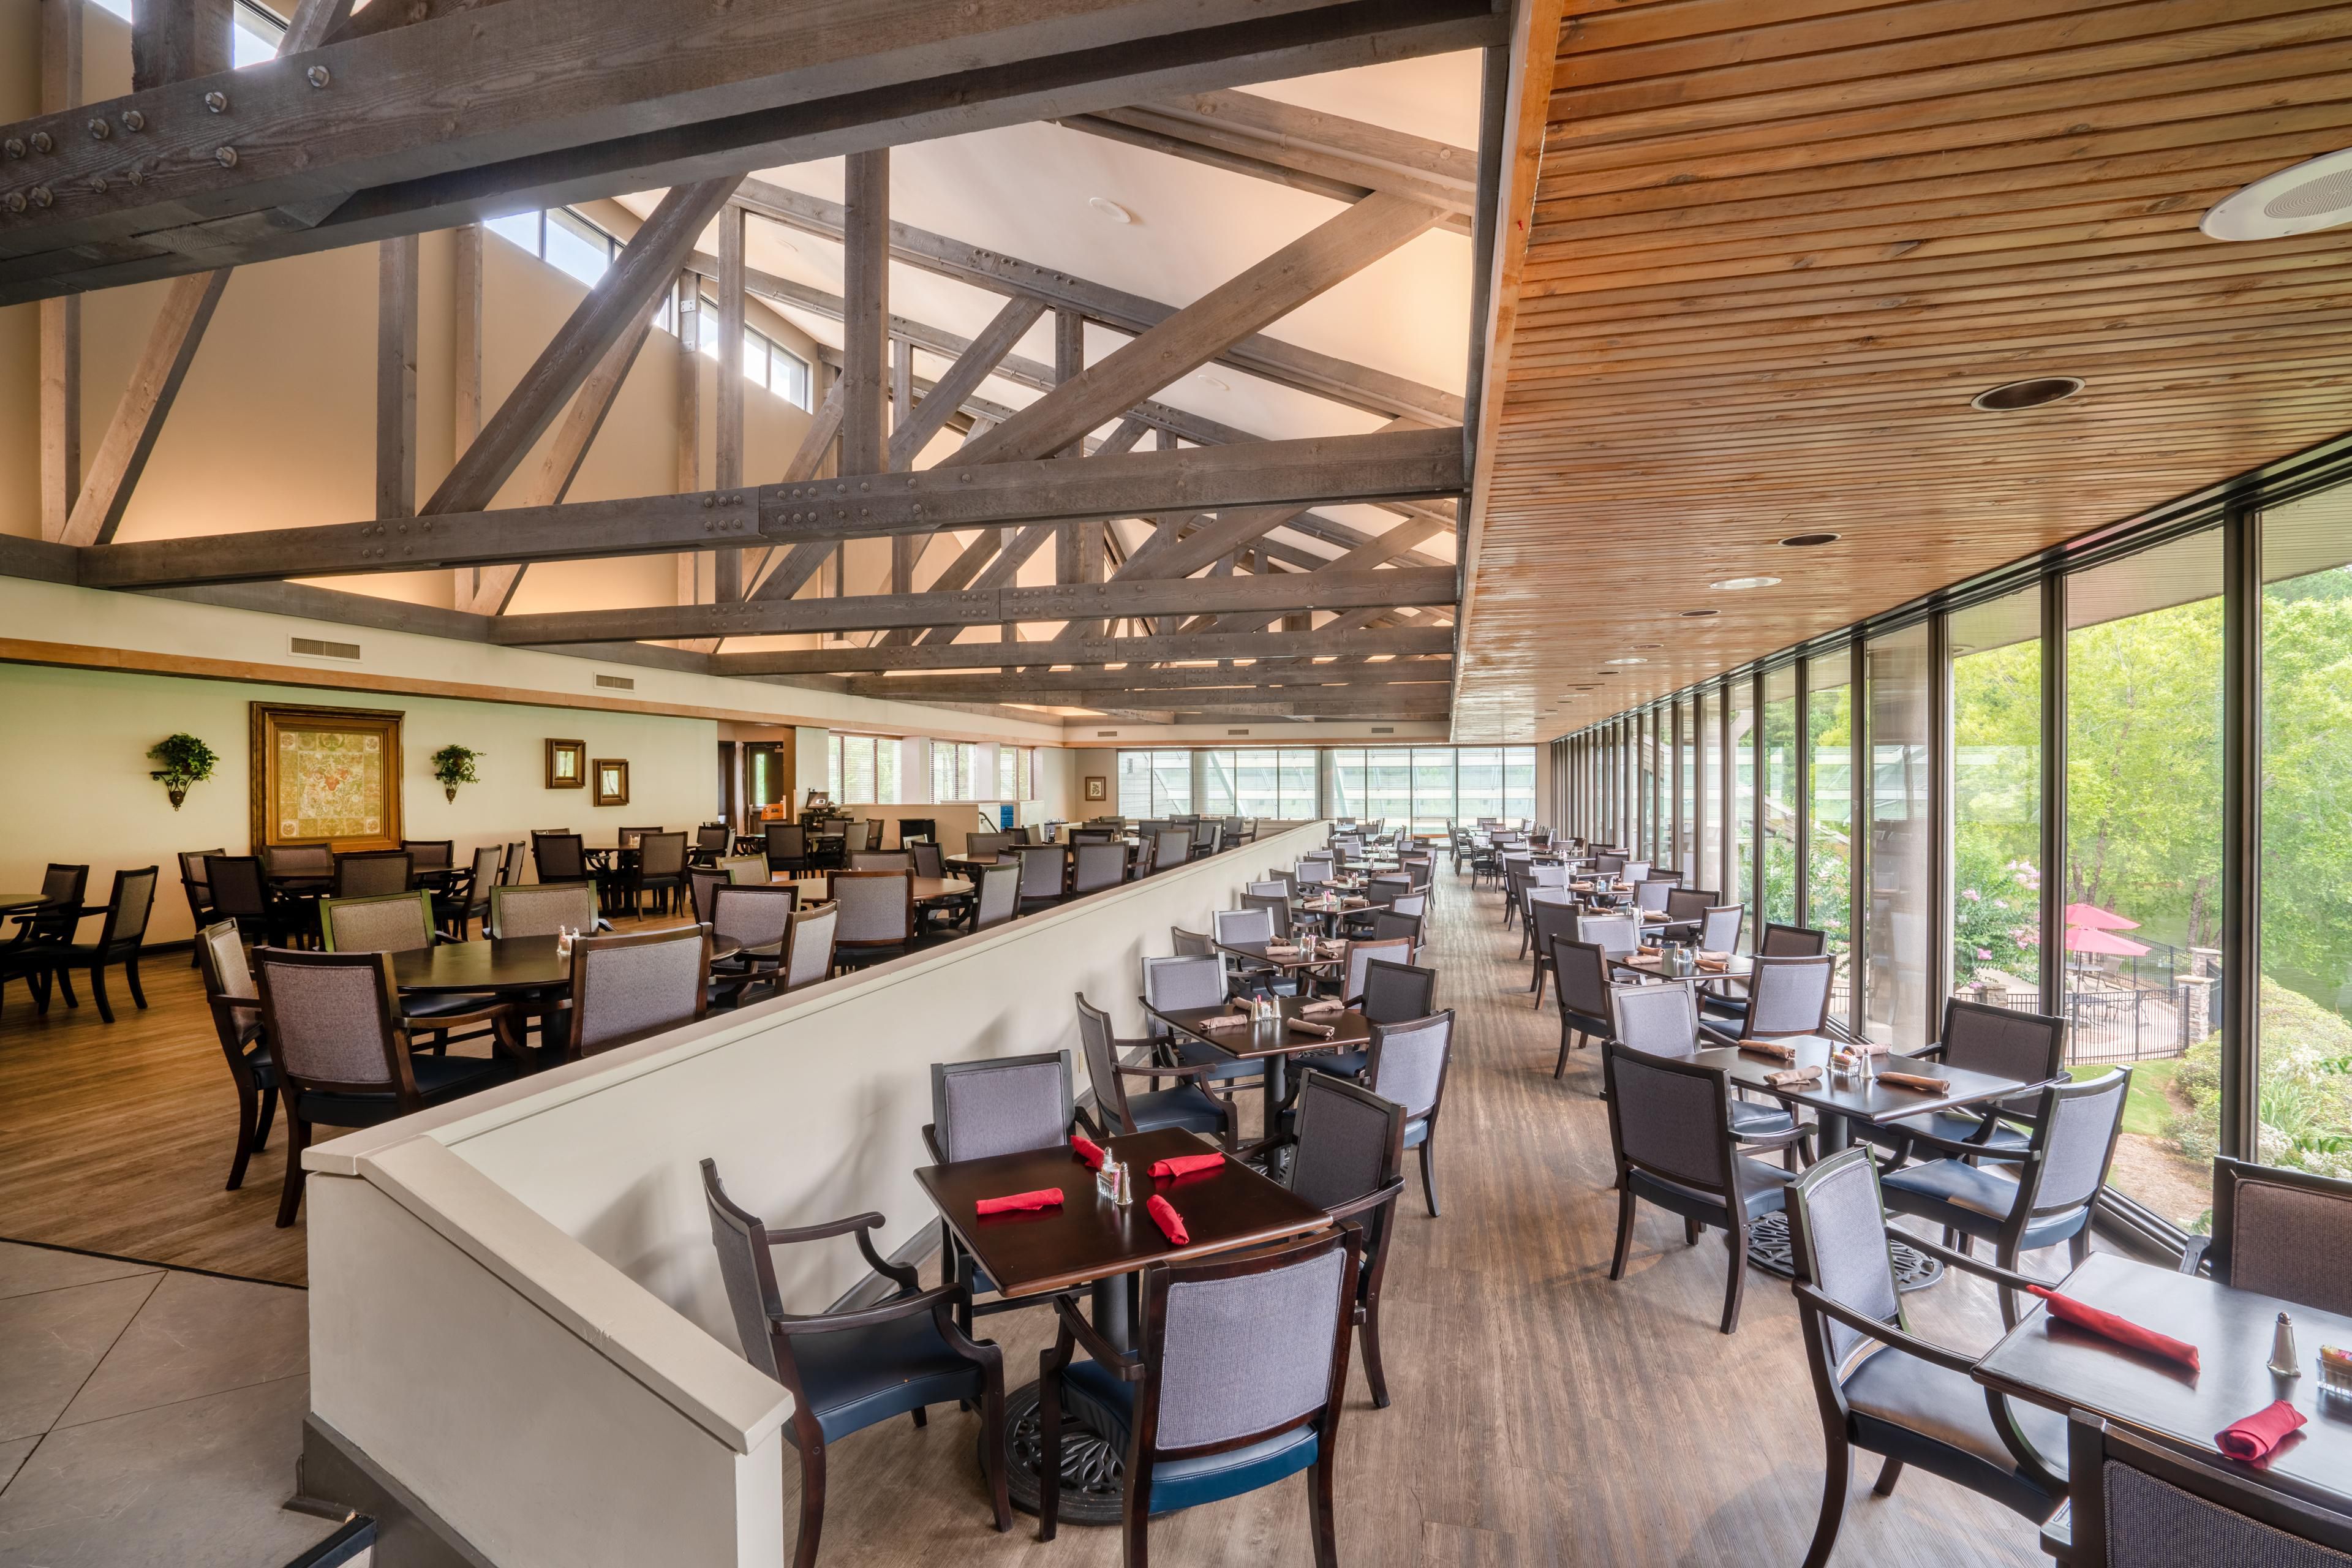 Two01 Restaurant offers delicious meals w/ a beautiful lake view 